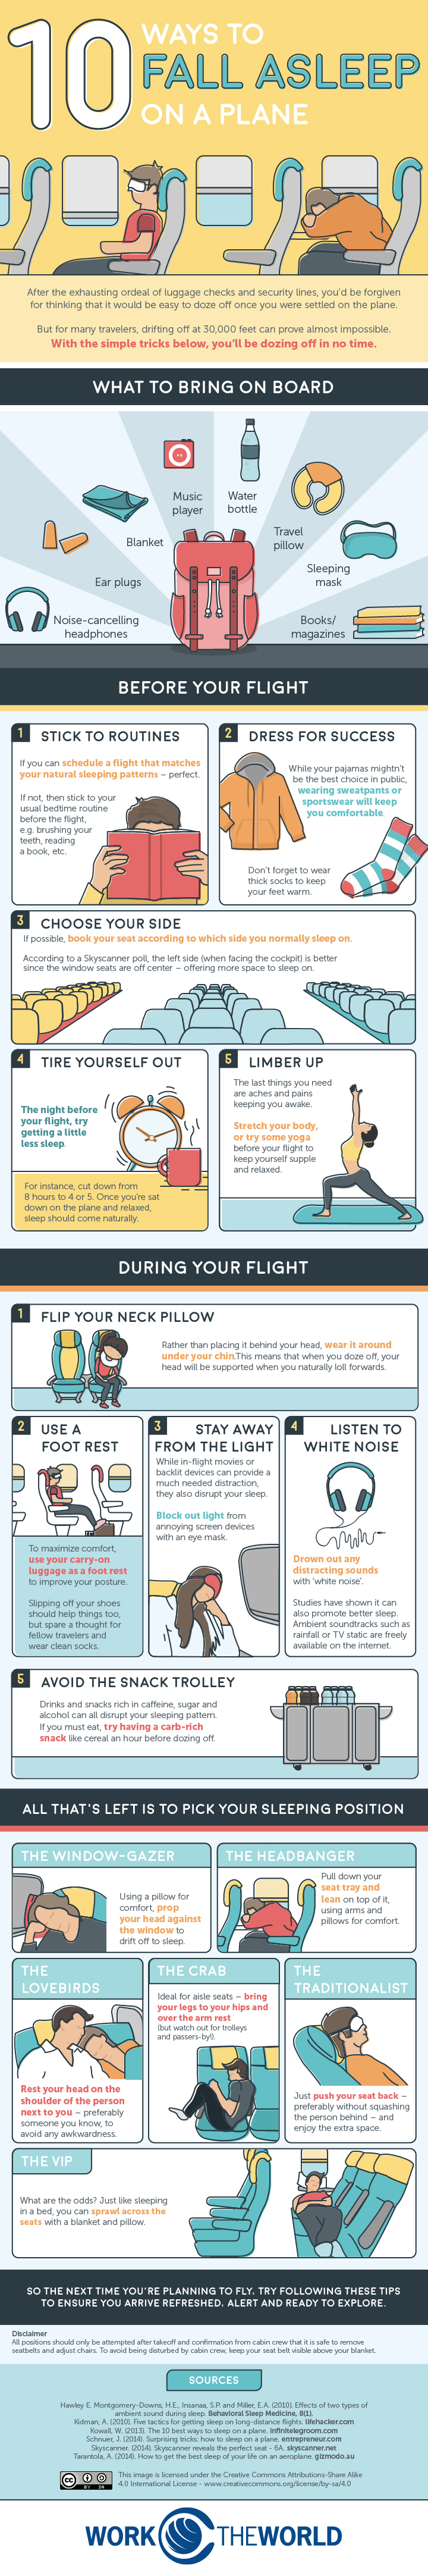 10 Ways to Fall Asleep on a Plane infographic